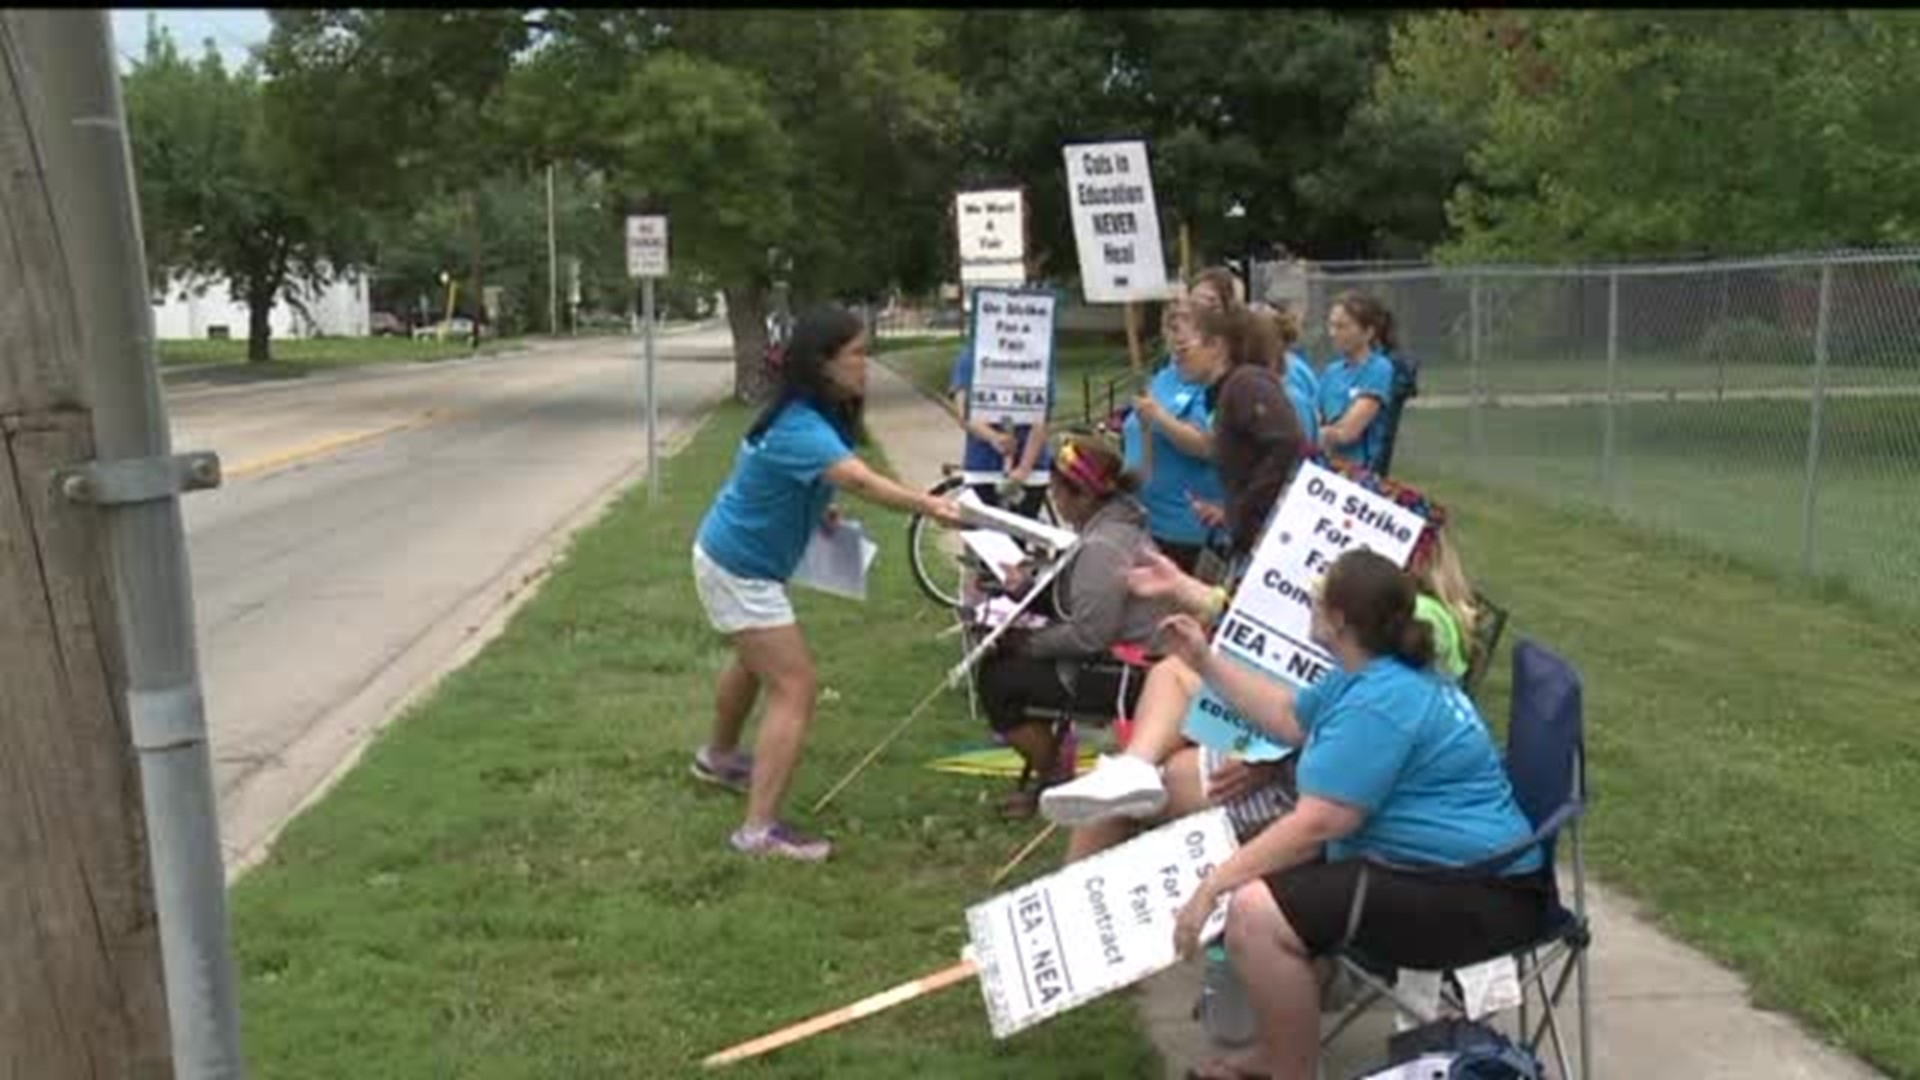 Recall rights are final sticking point in strike negotiations